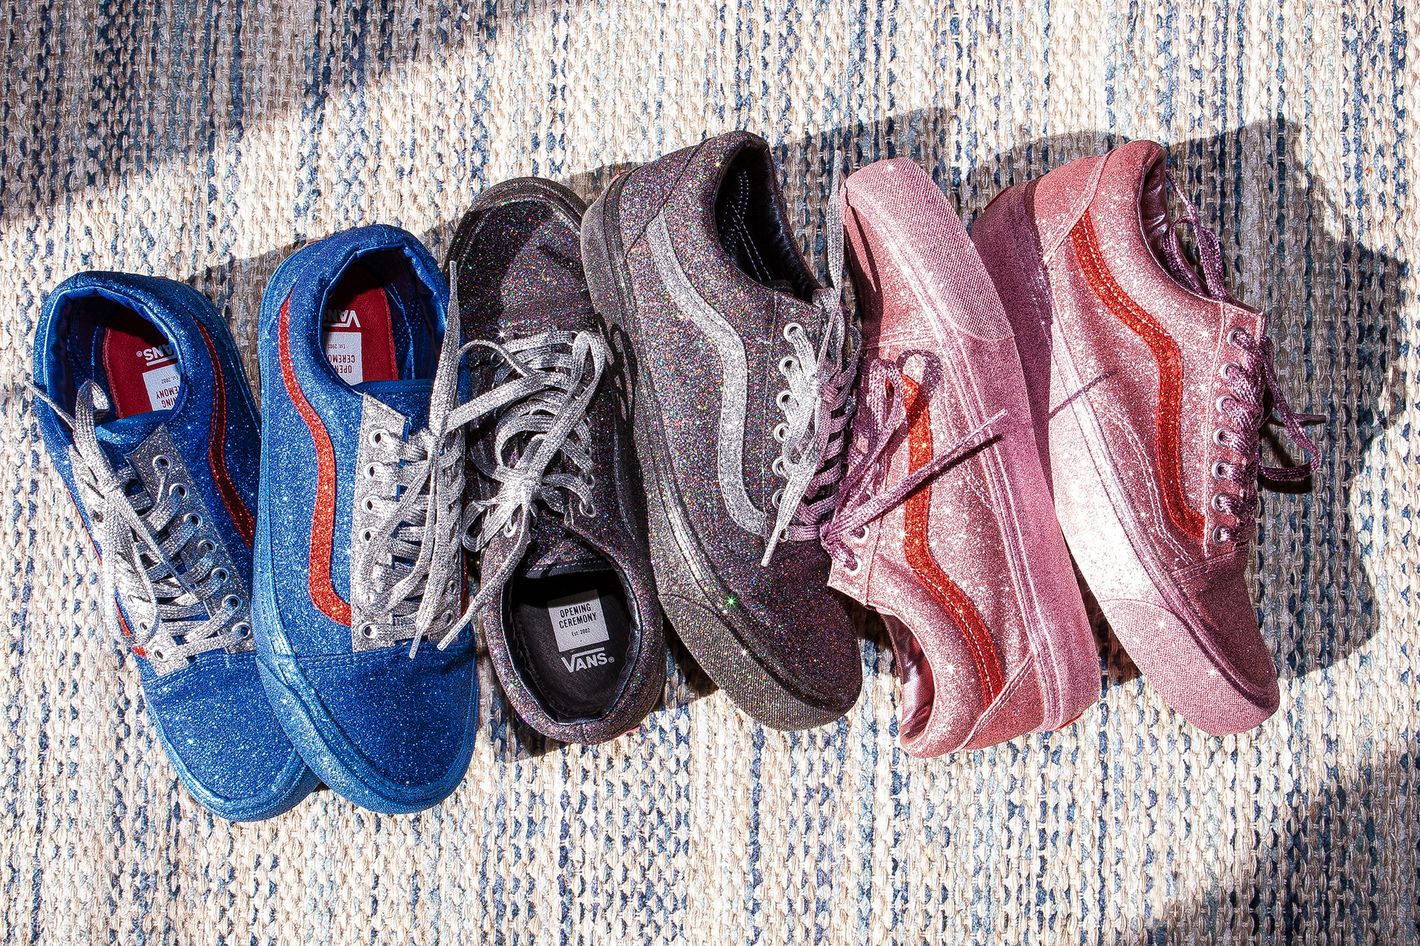 Sneakers Get Opening Vans Ceremony: Now x New the Glittery